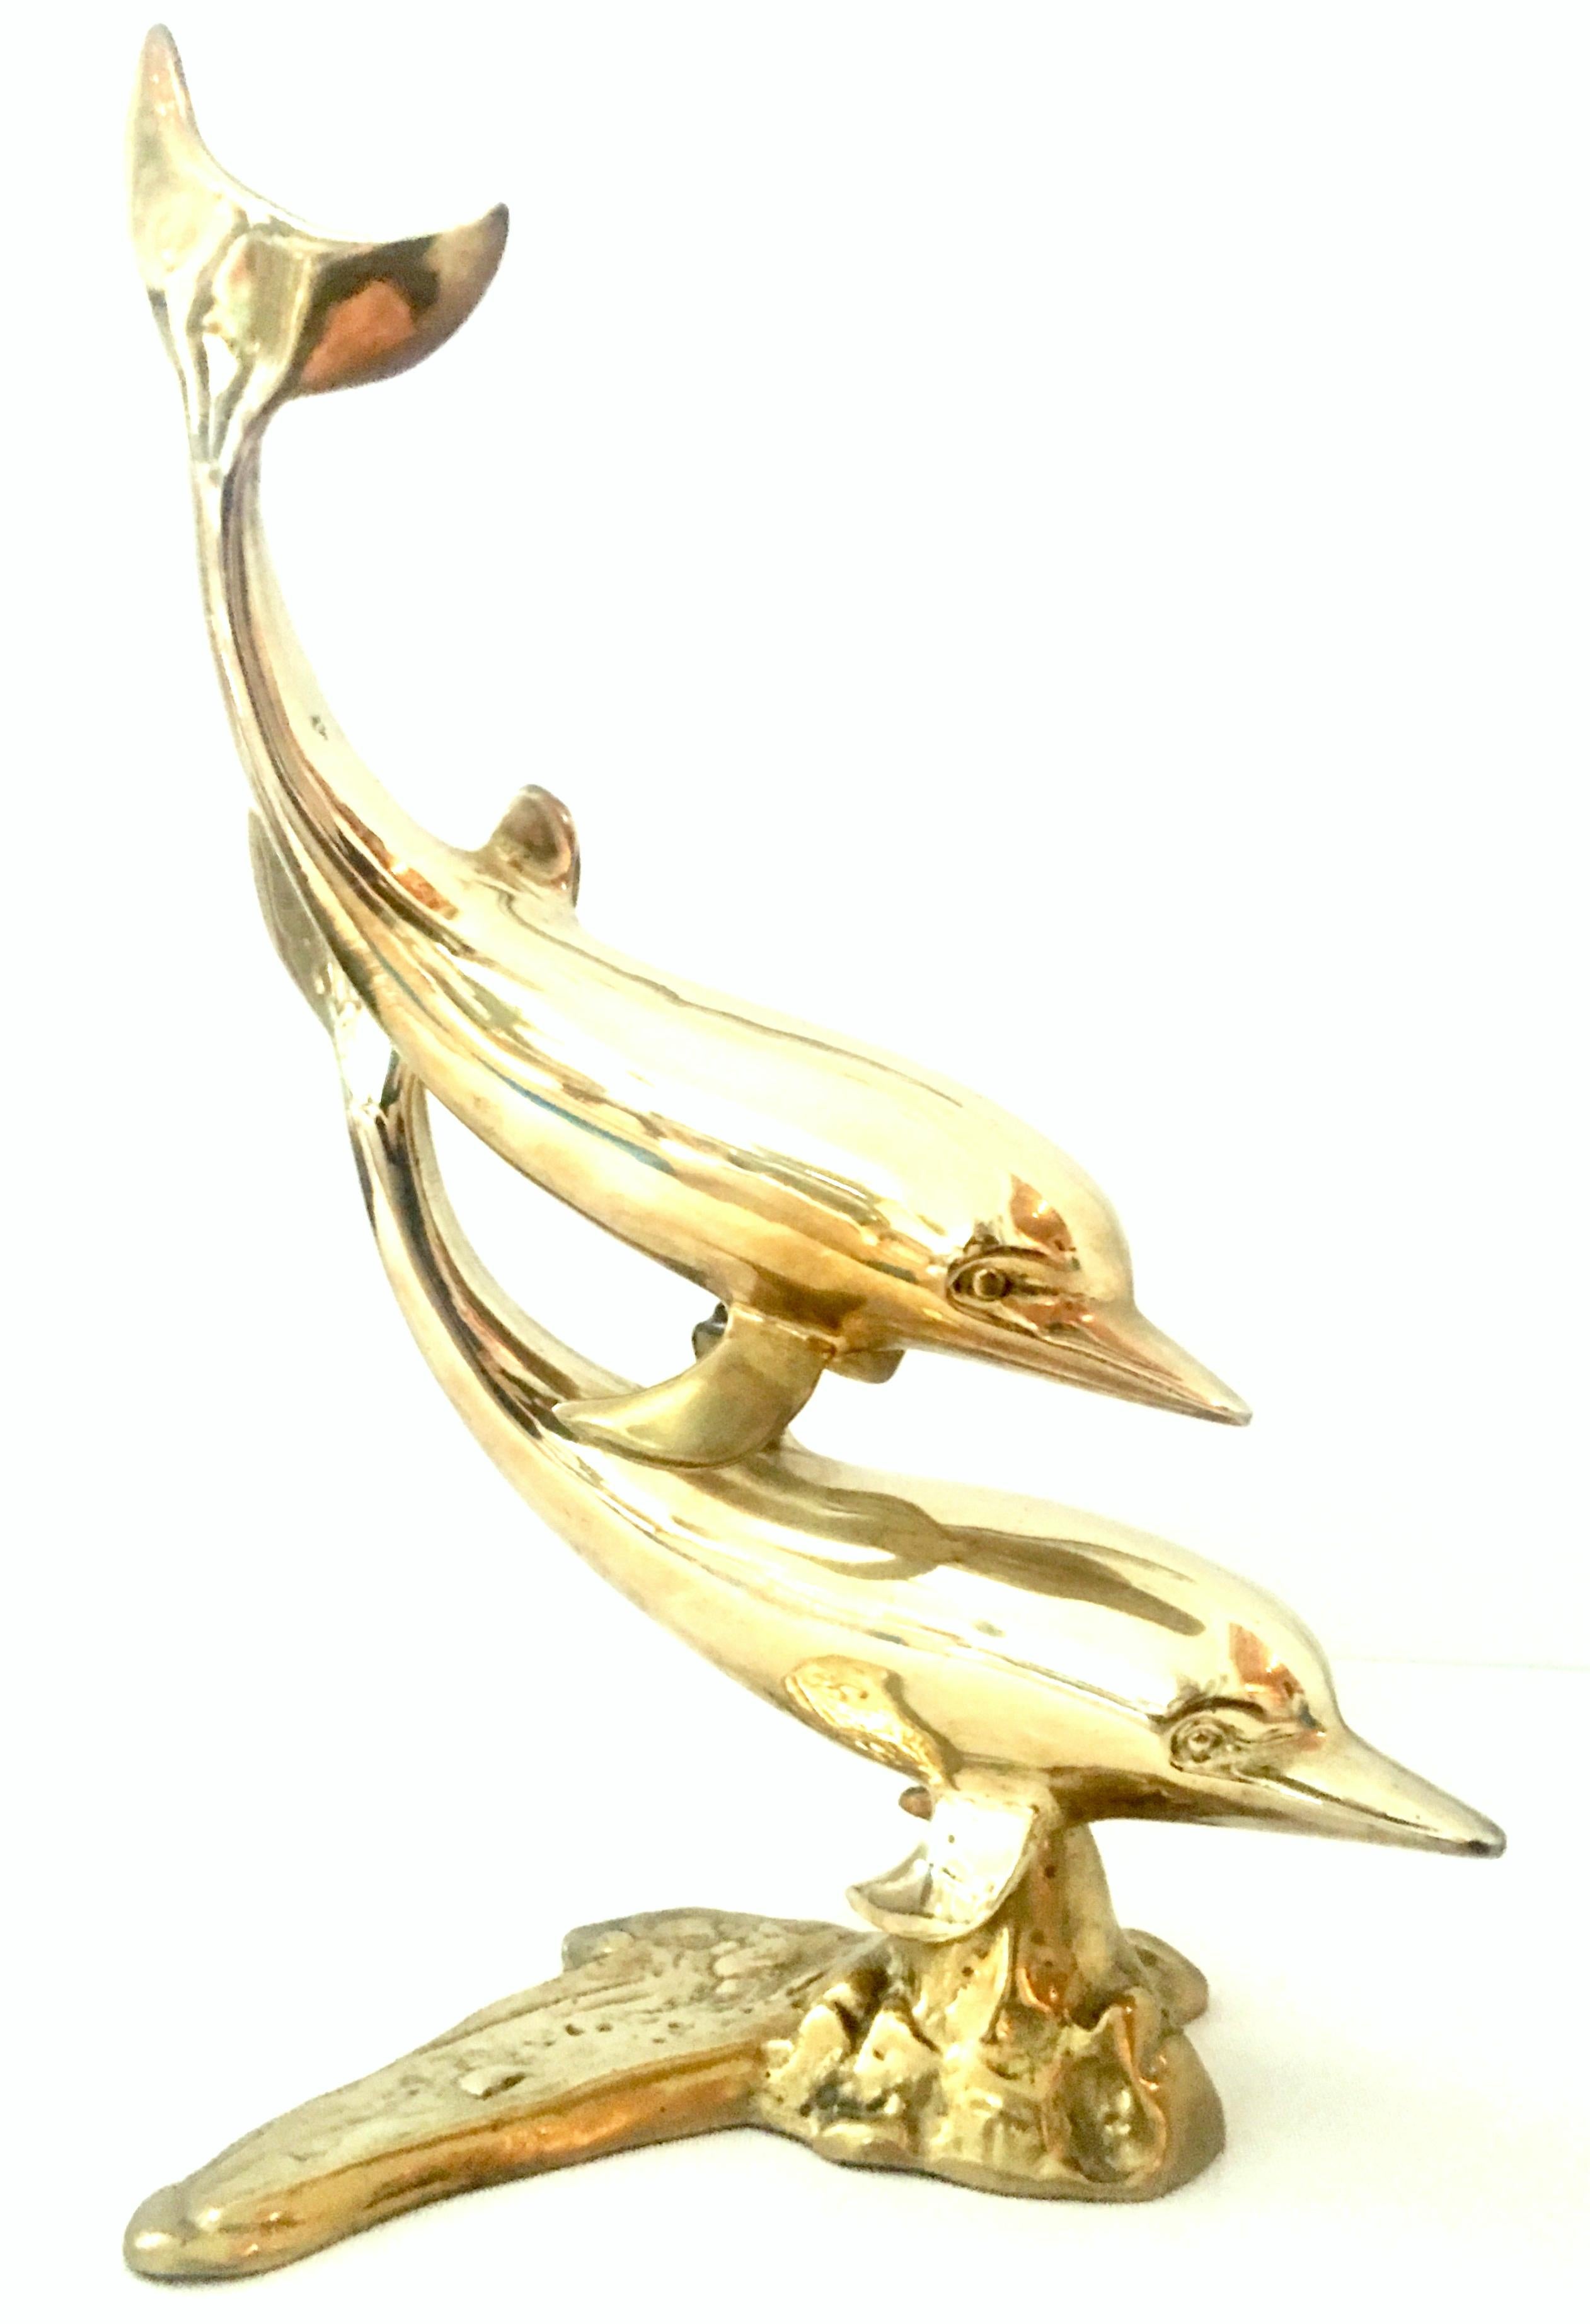 20th Century large scale polished solid brass double dolphin sculpture.